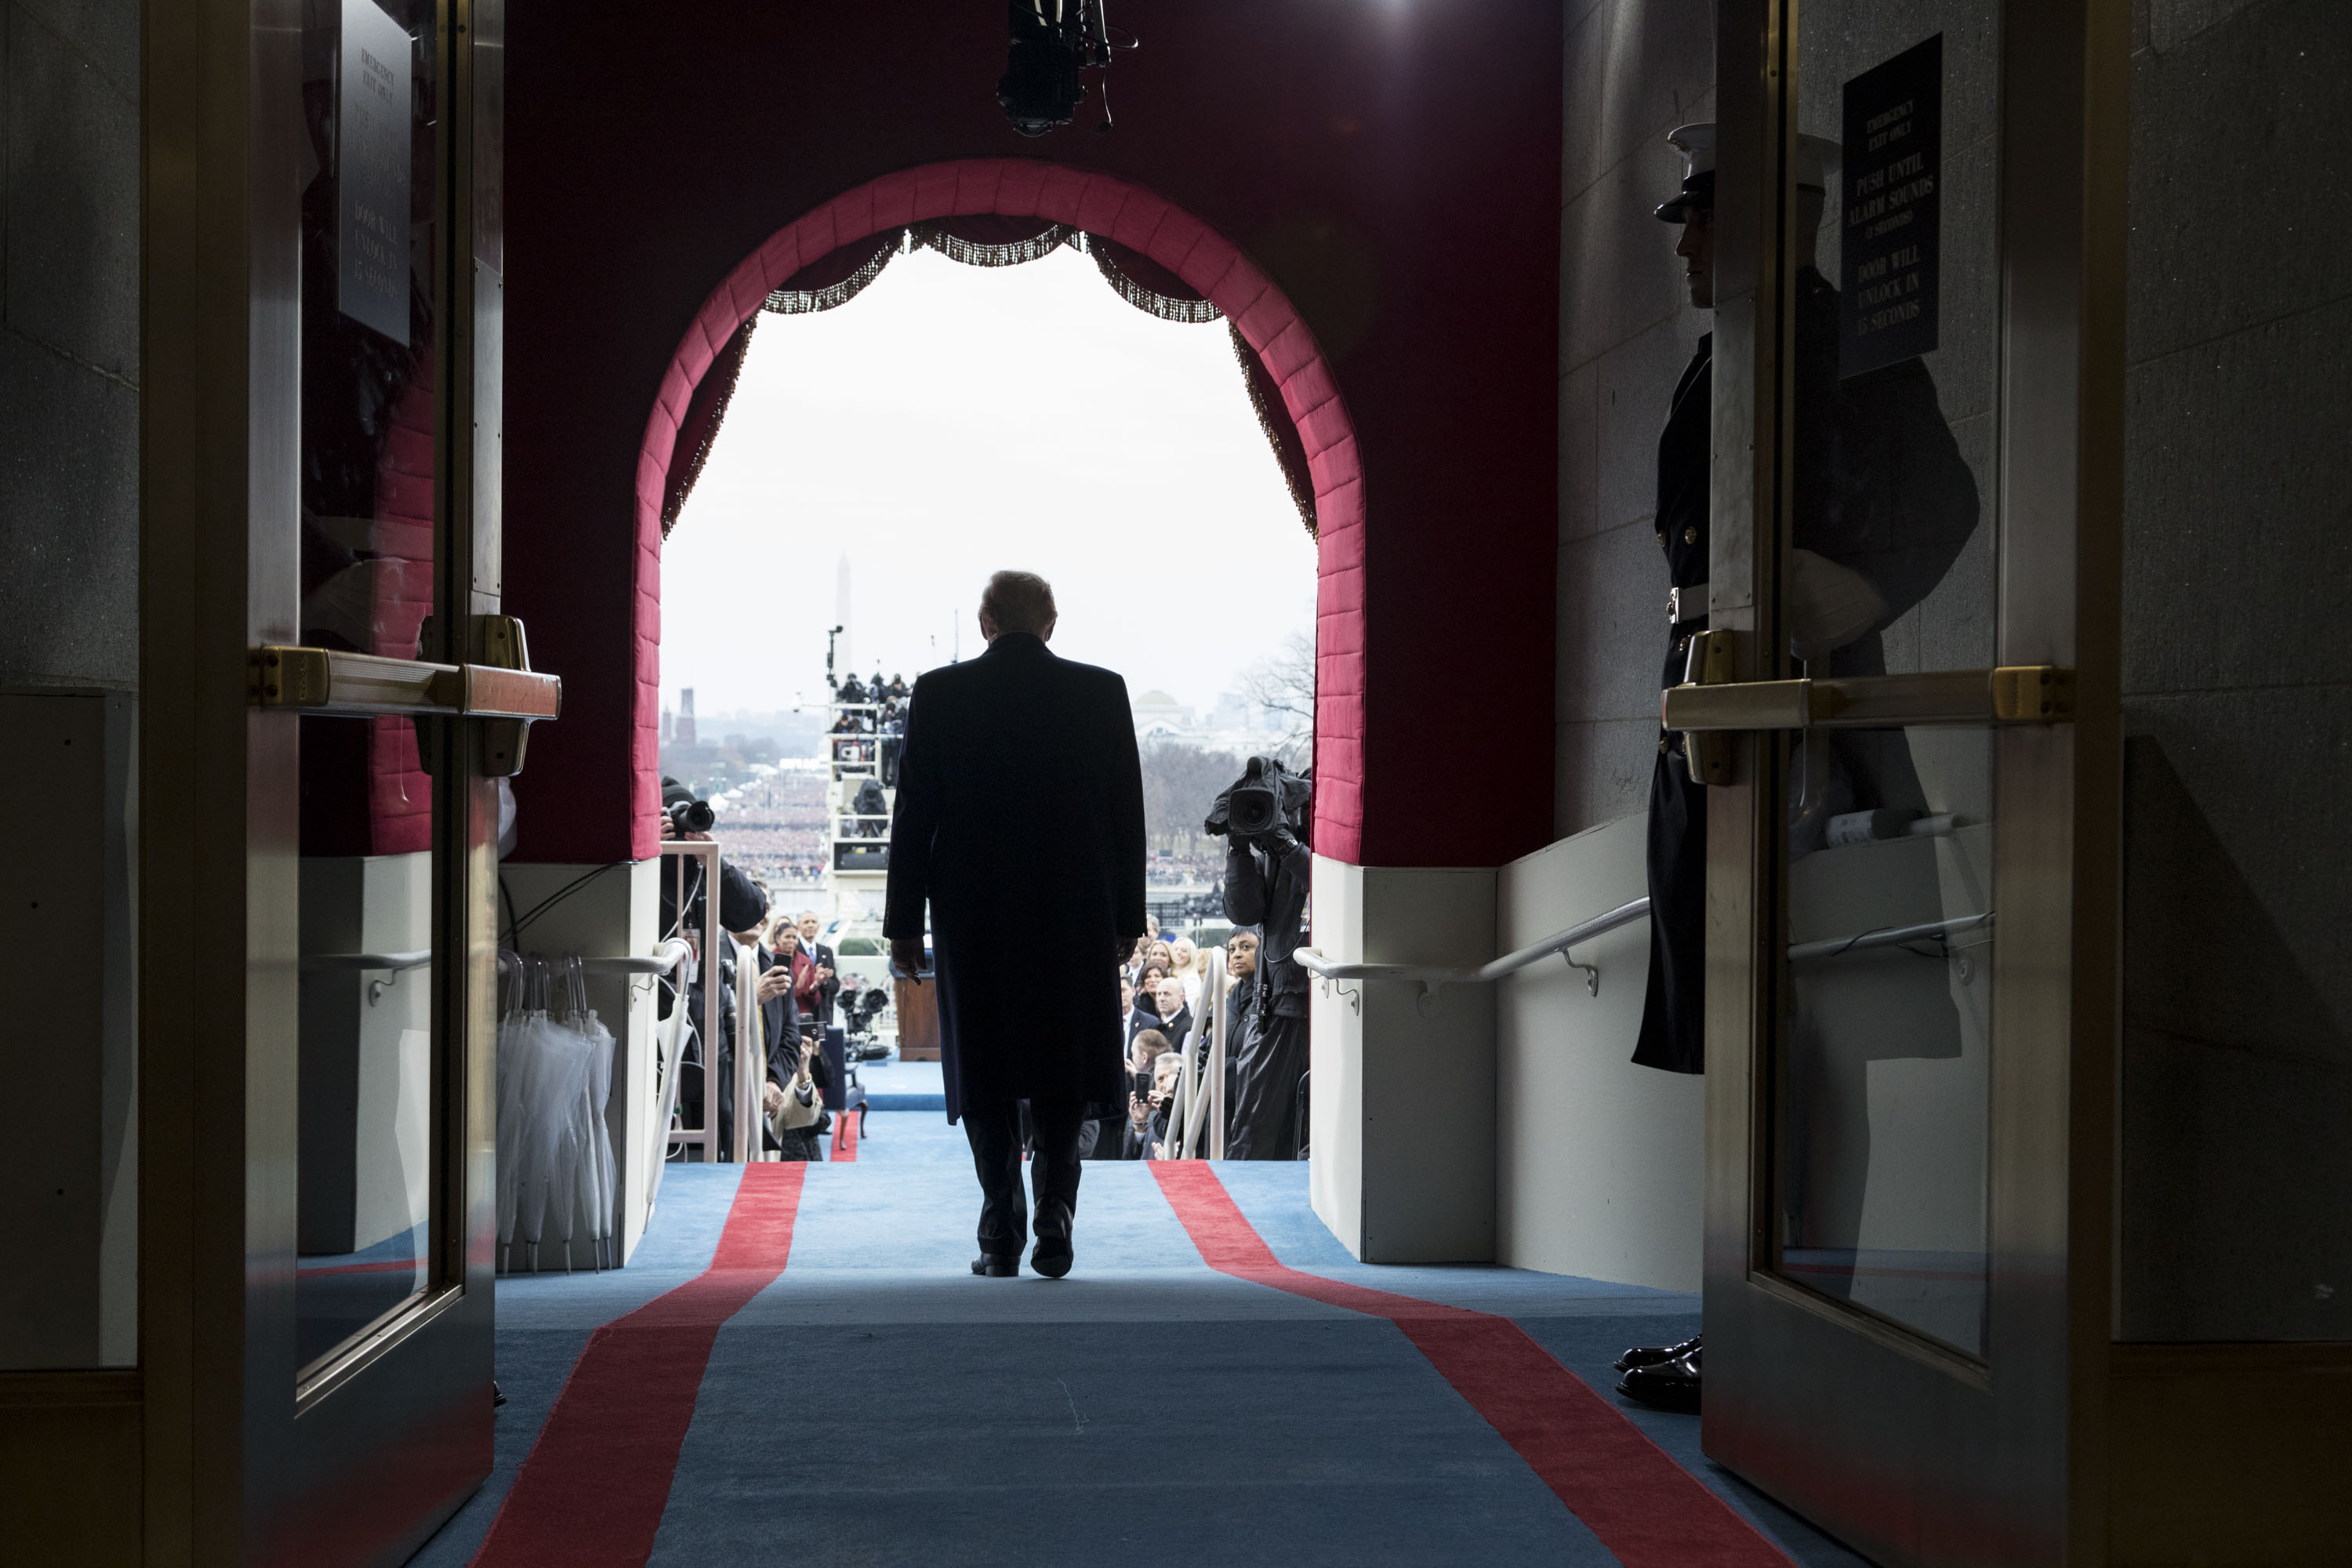 President-elect Donald Trump walks to take his seat for the inaugural swearing-in ceremony at the U.S. Capitol in Washington, D.C., Friday, January 20, 2017. (Official White House Photo by Shealah Craighead)